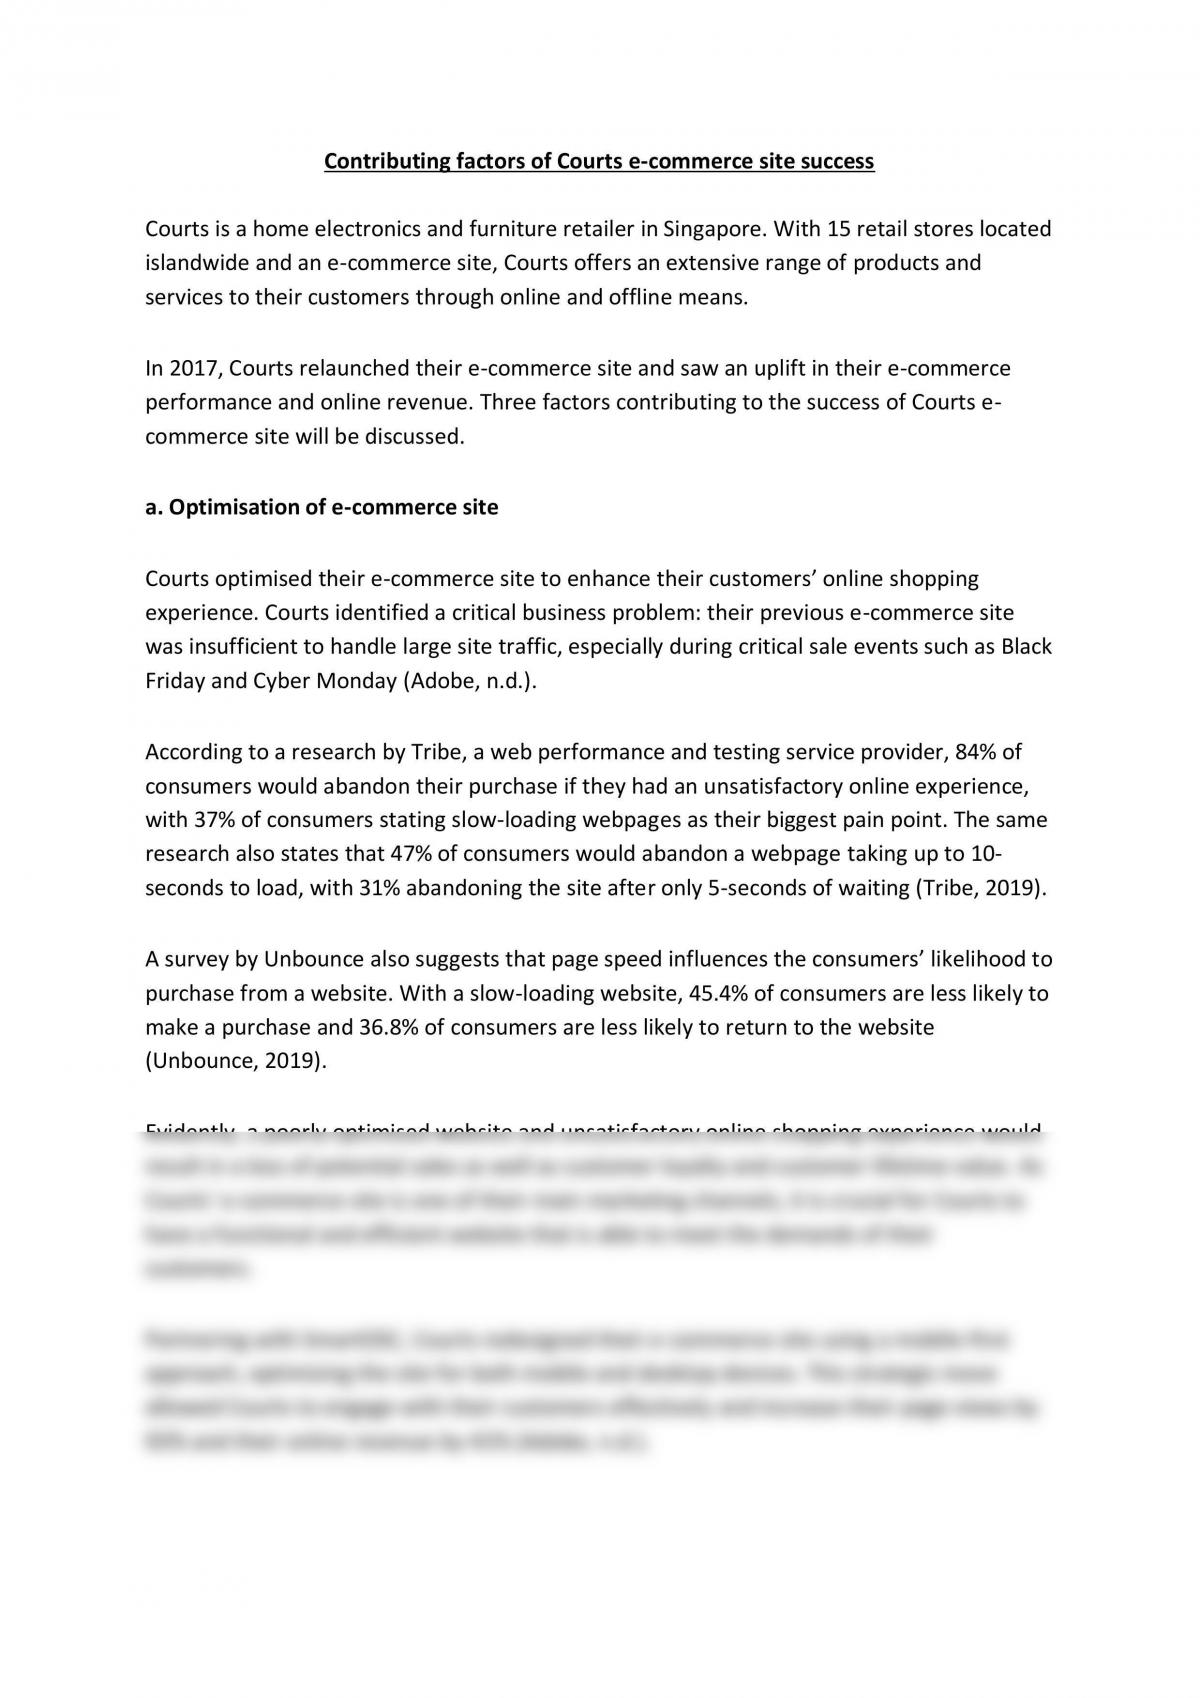 MKT2020 TMA01 - Page 1